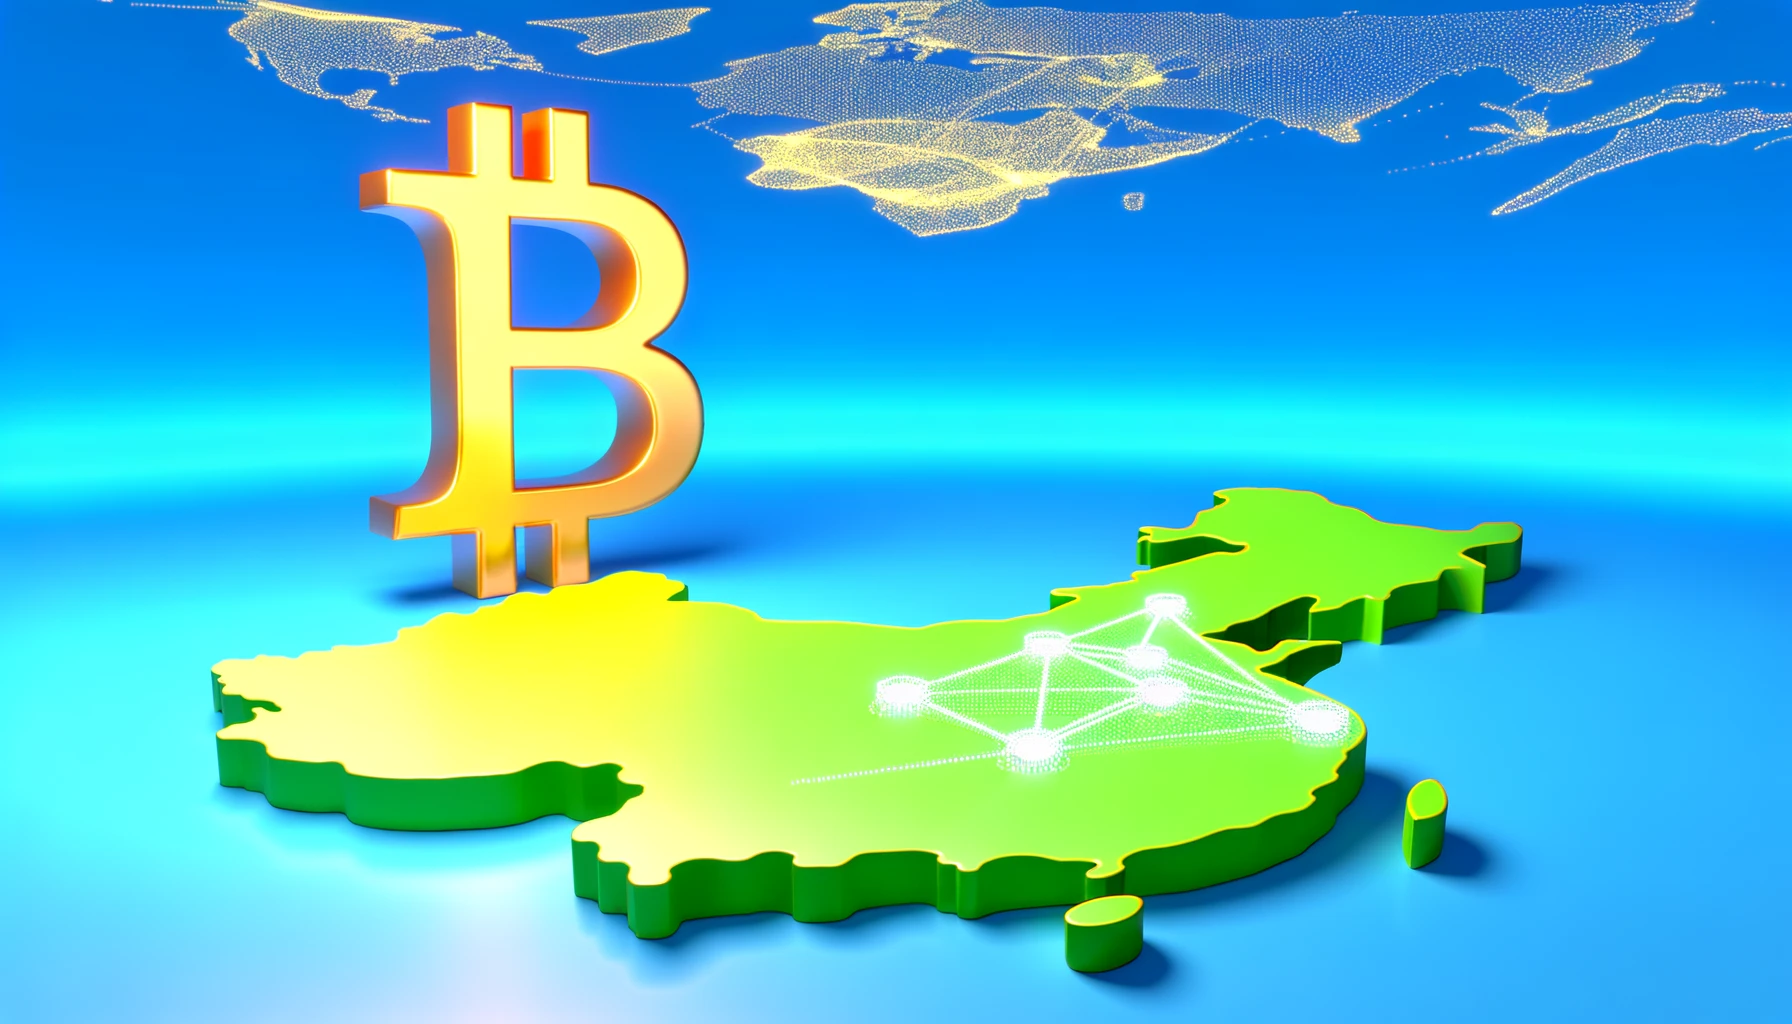 Against all odds, Chinese cryptocurrency enthusiasts amass an impressive $1 billion in gains.